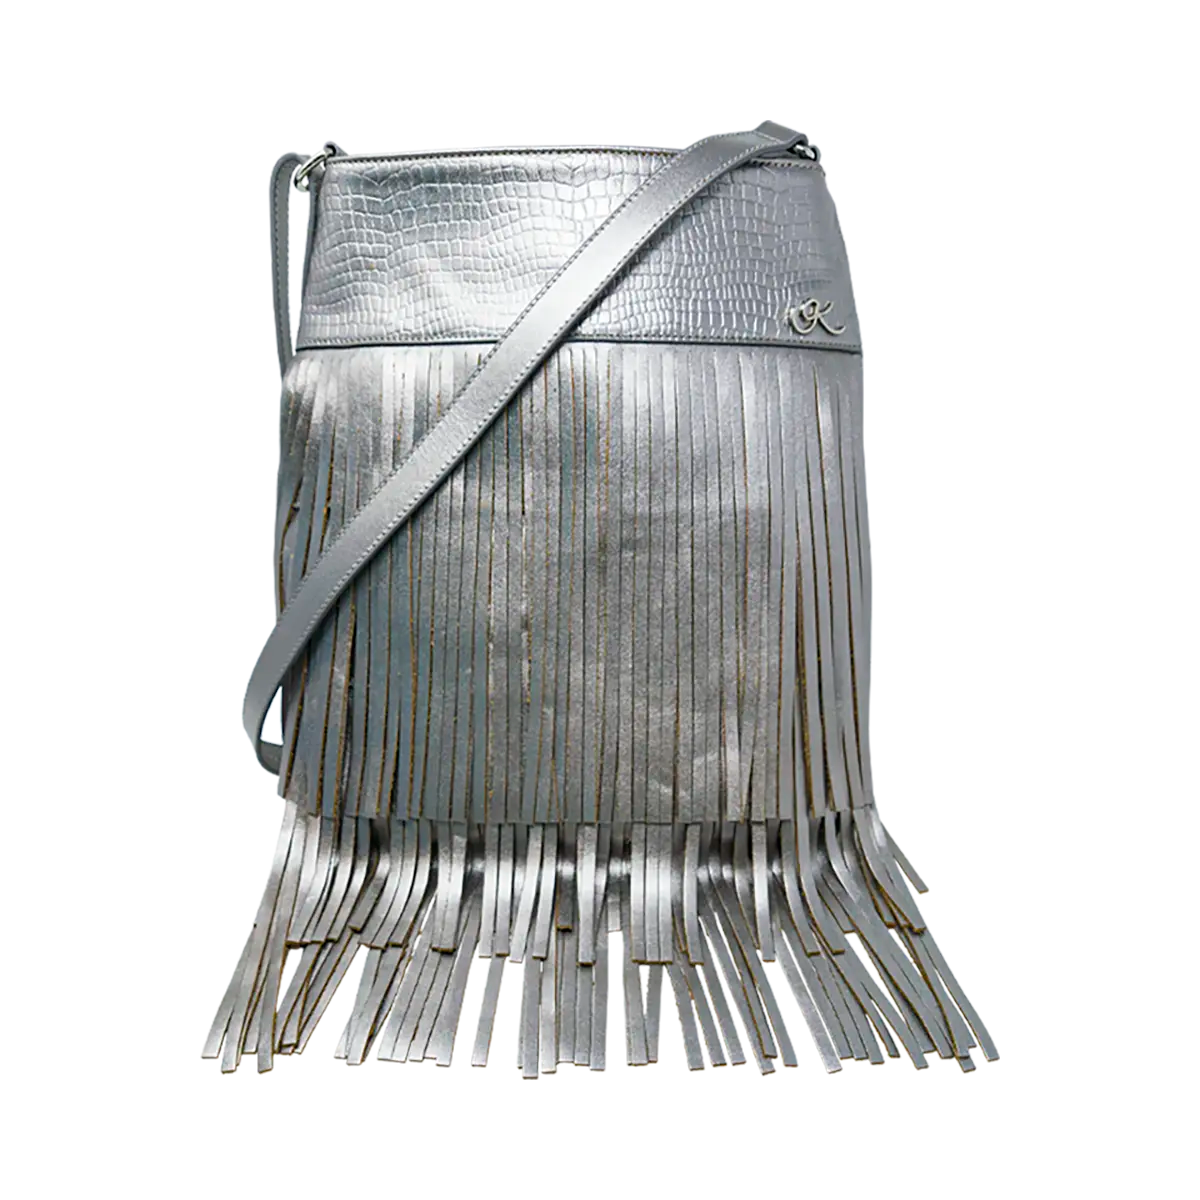 silver leather shoulder bag with 3 layers of fringe. Fashion accessories, for women in San Diego, CA.